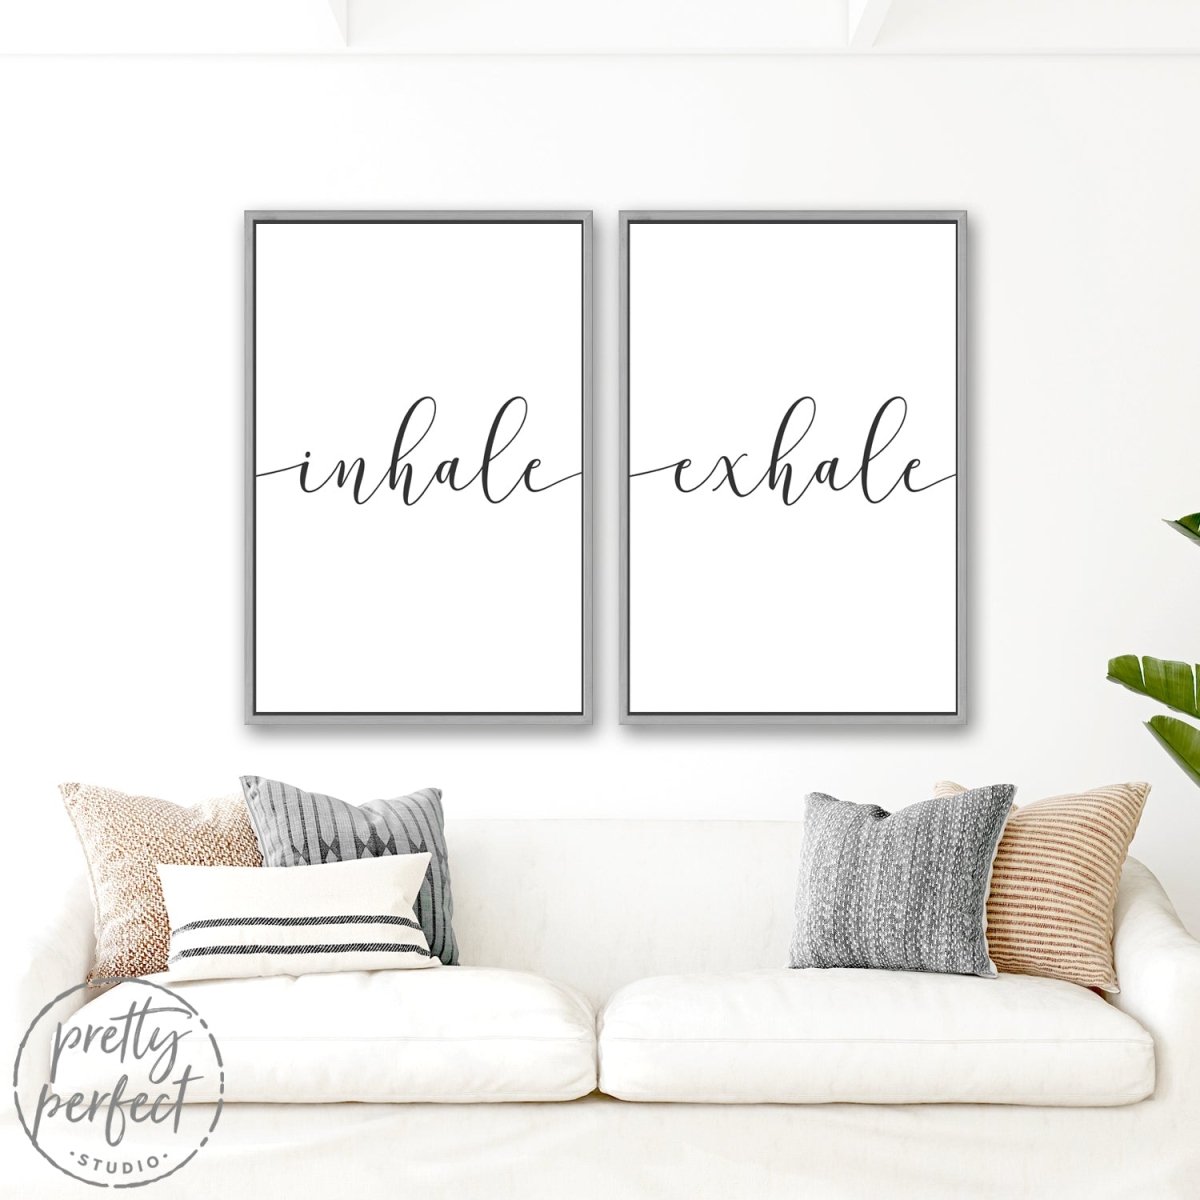 Inhale Exhale Canvas Art Hanging on Wall Above Couch - Pretty Perfect Studio